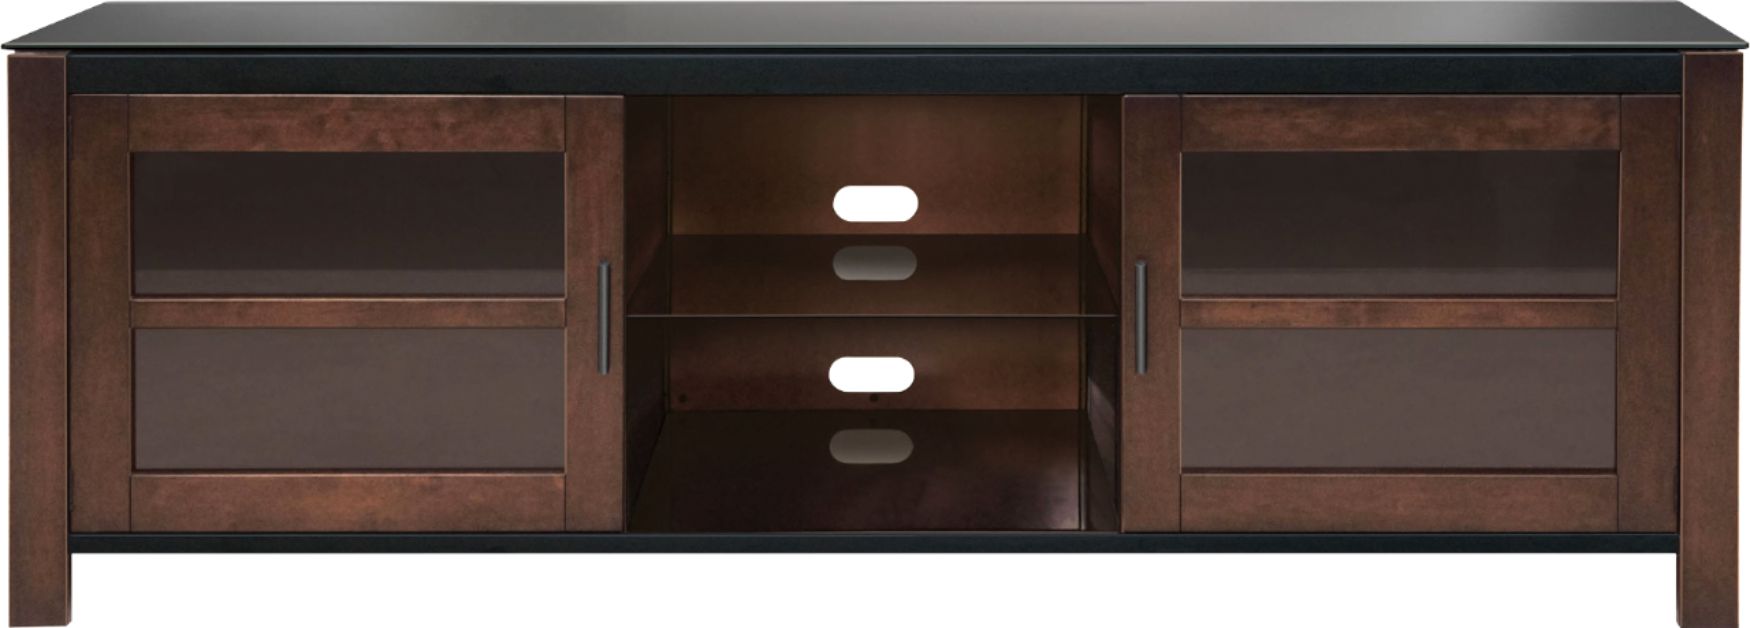 Insignia™ TV Stand for Most Flat-Panel TVs Up to 70